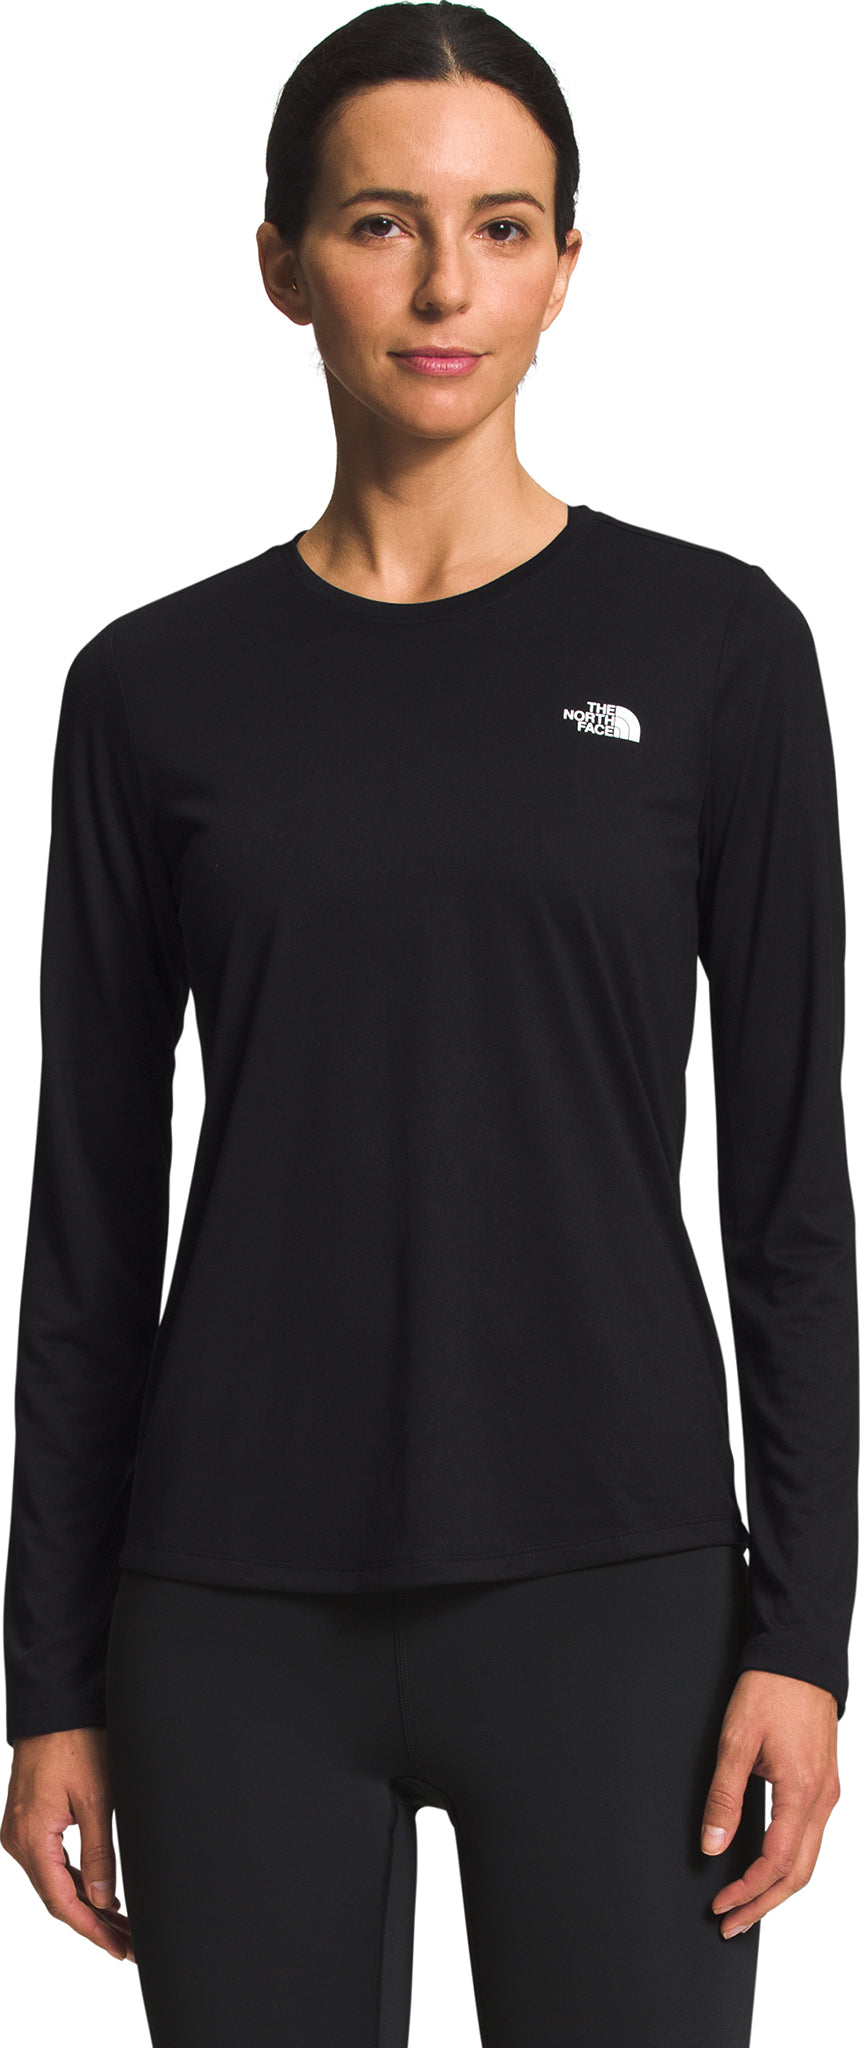 The North Face Elevation Long Sleeve T-shirt - Women's M TNF Black